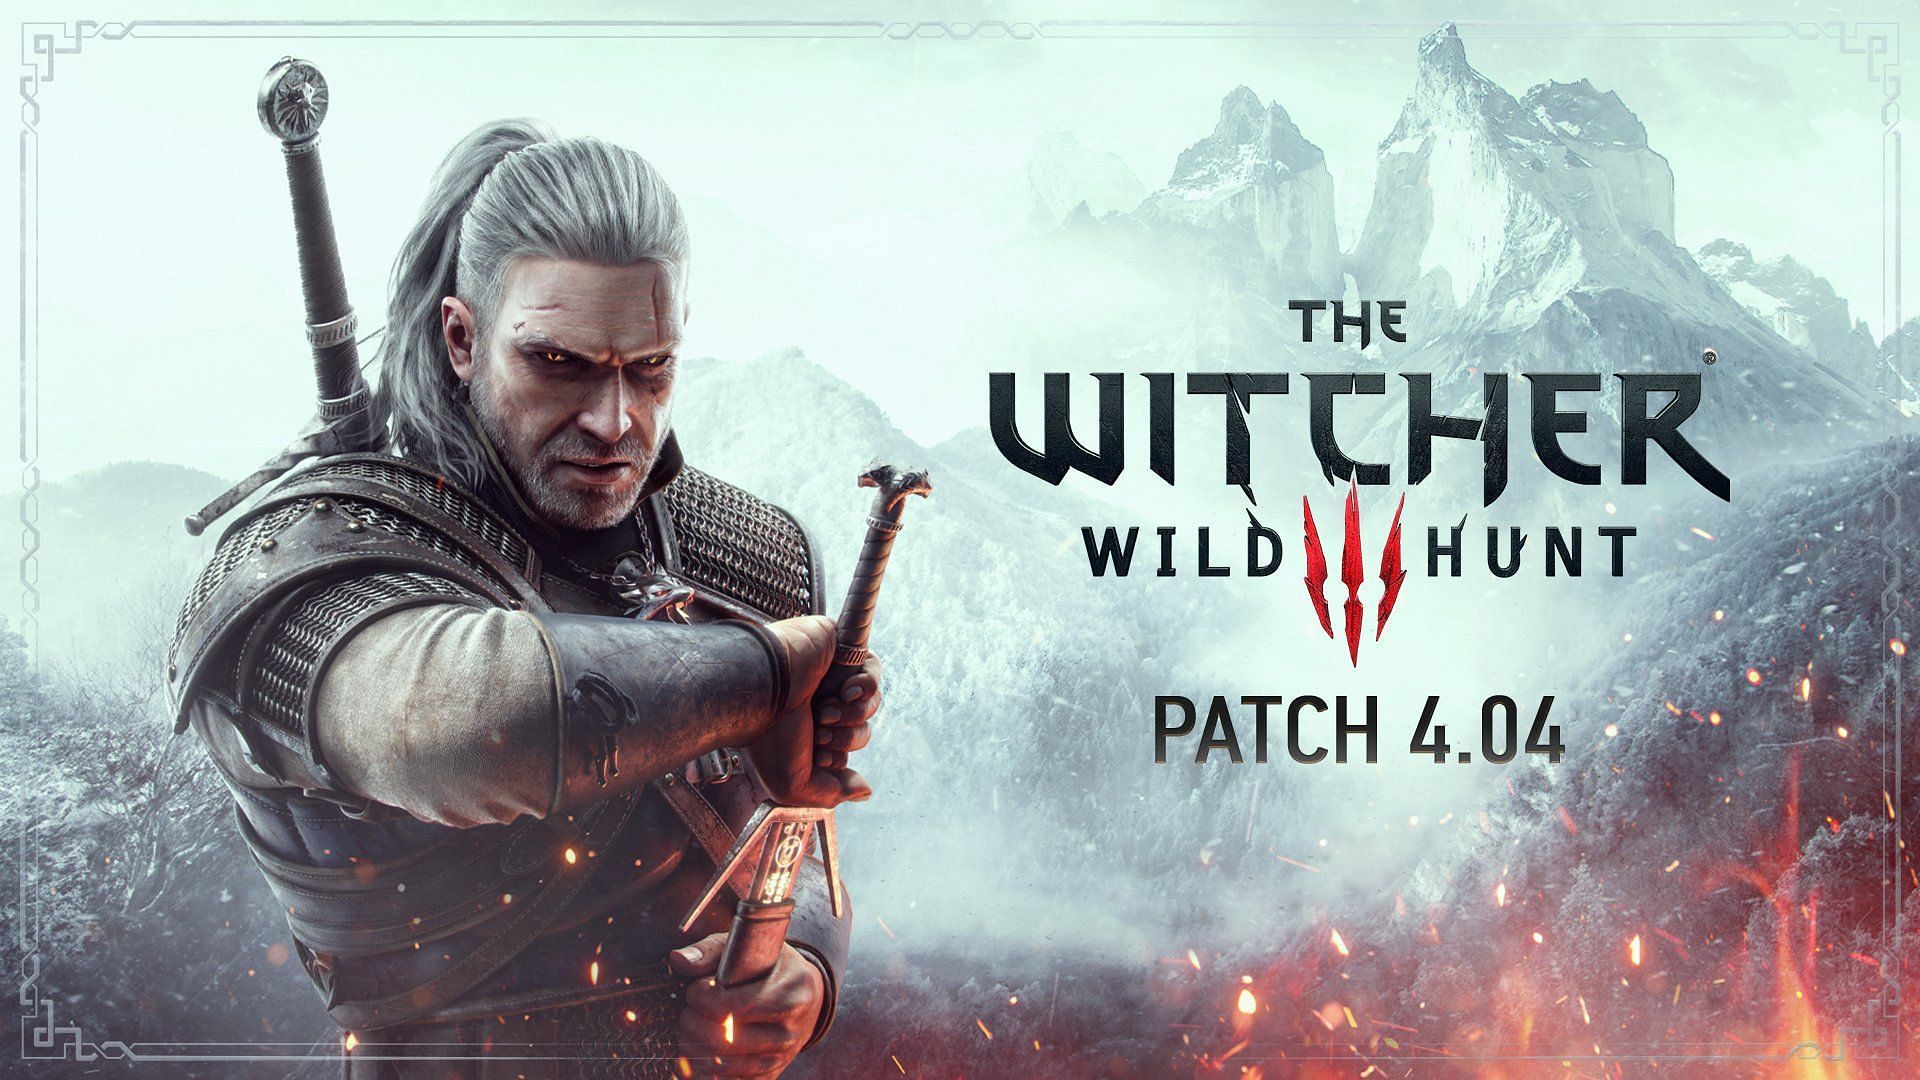 The Witcher 3 Patch 4.04 contents (Image via CD Projekt Red)